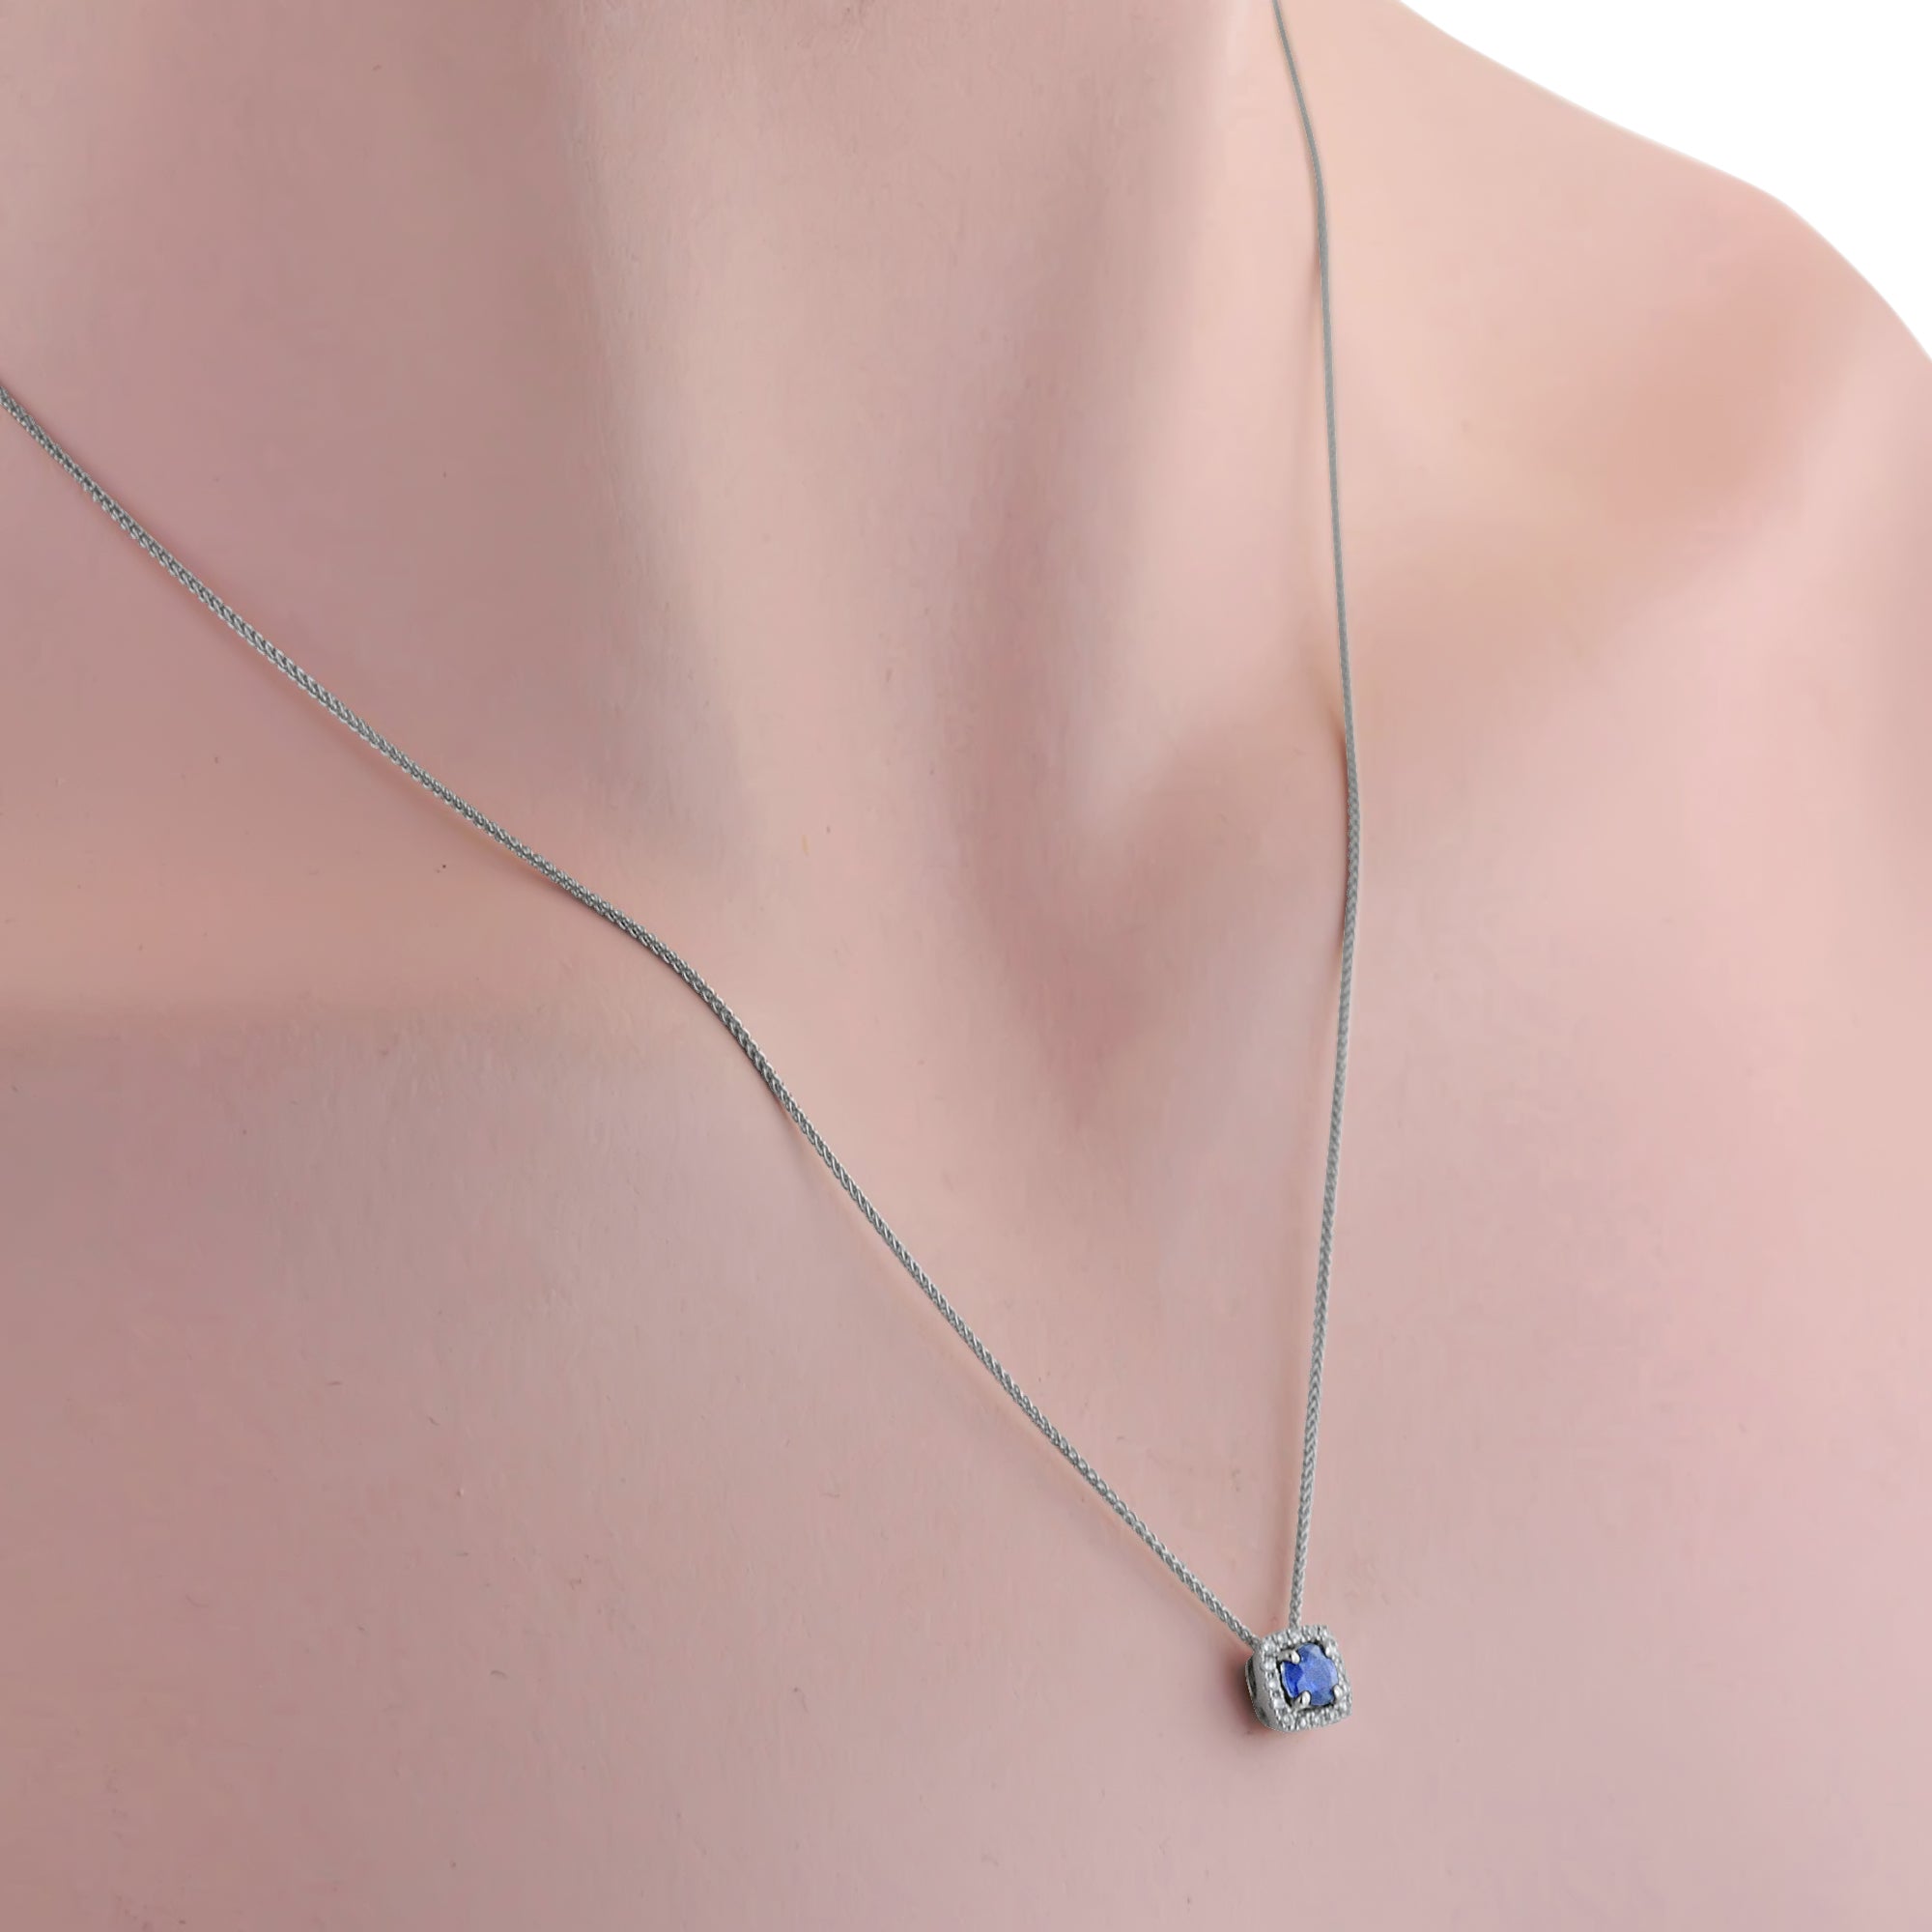 Sapphire Halo Necklace in 14kt White Gold with Diamonds (1/20ct tw)